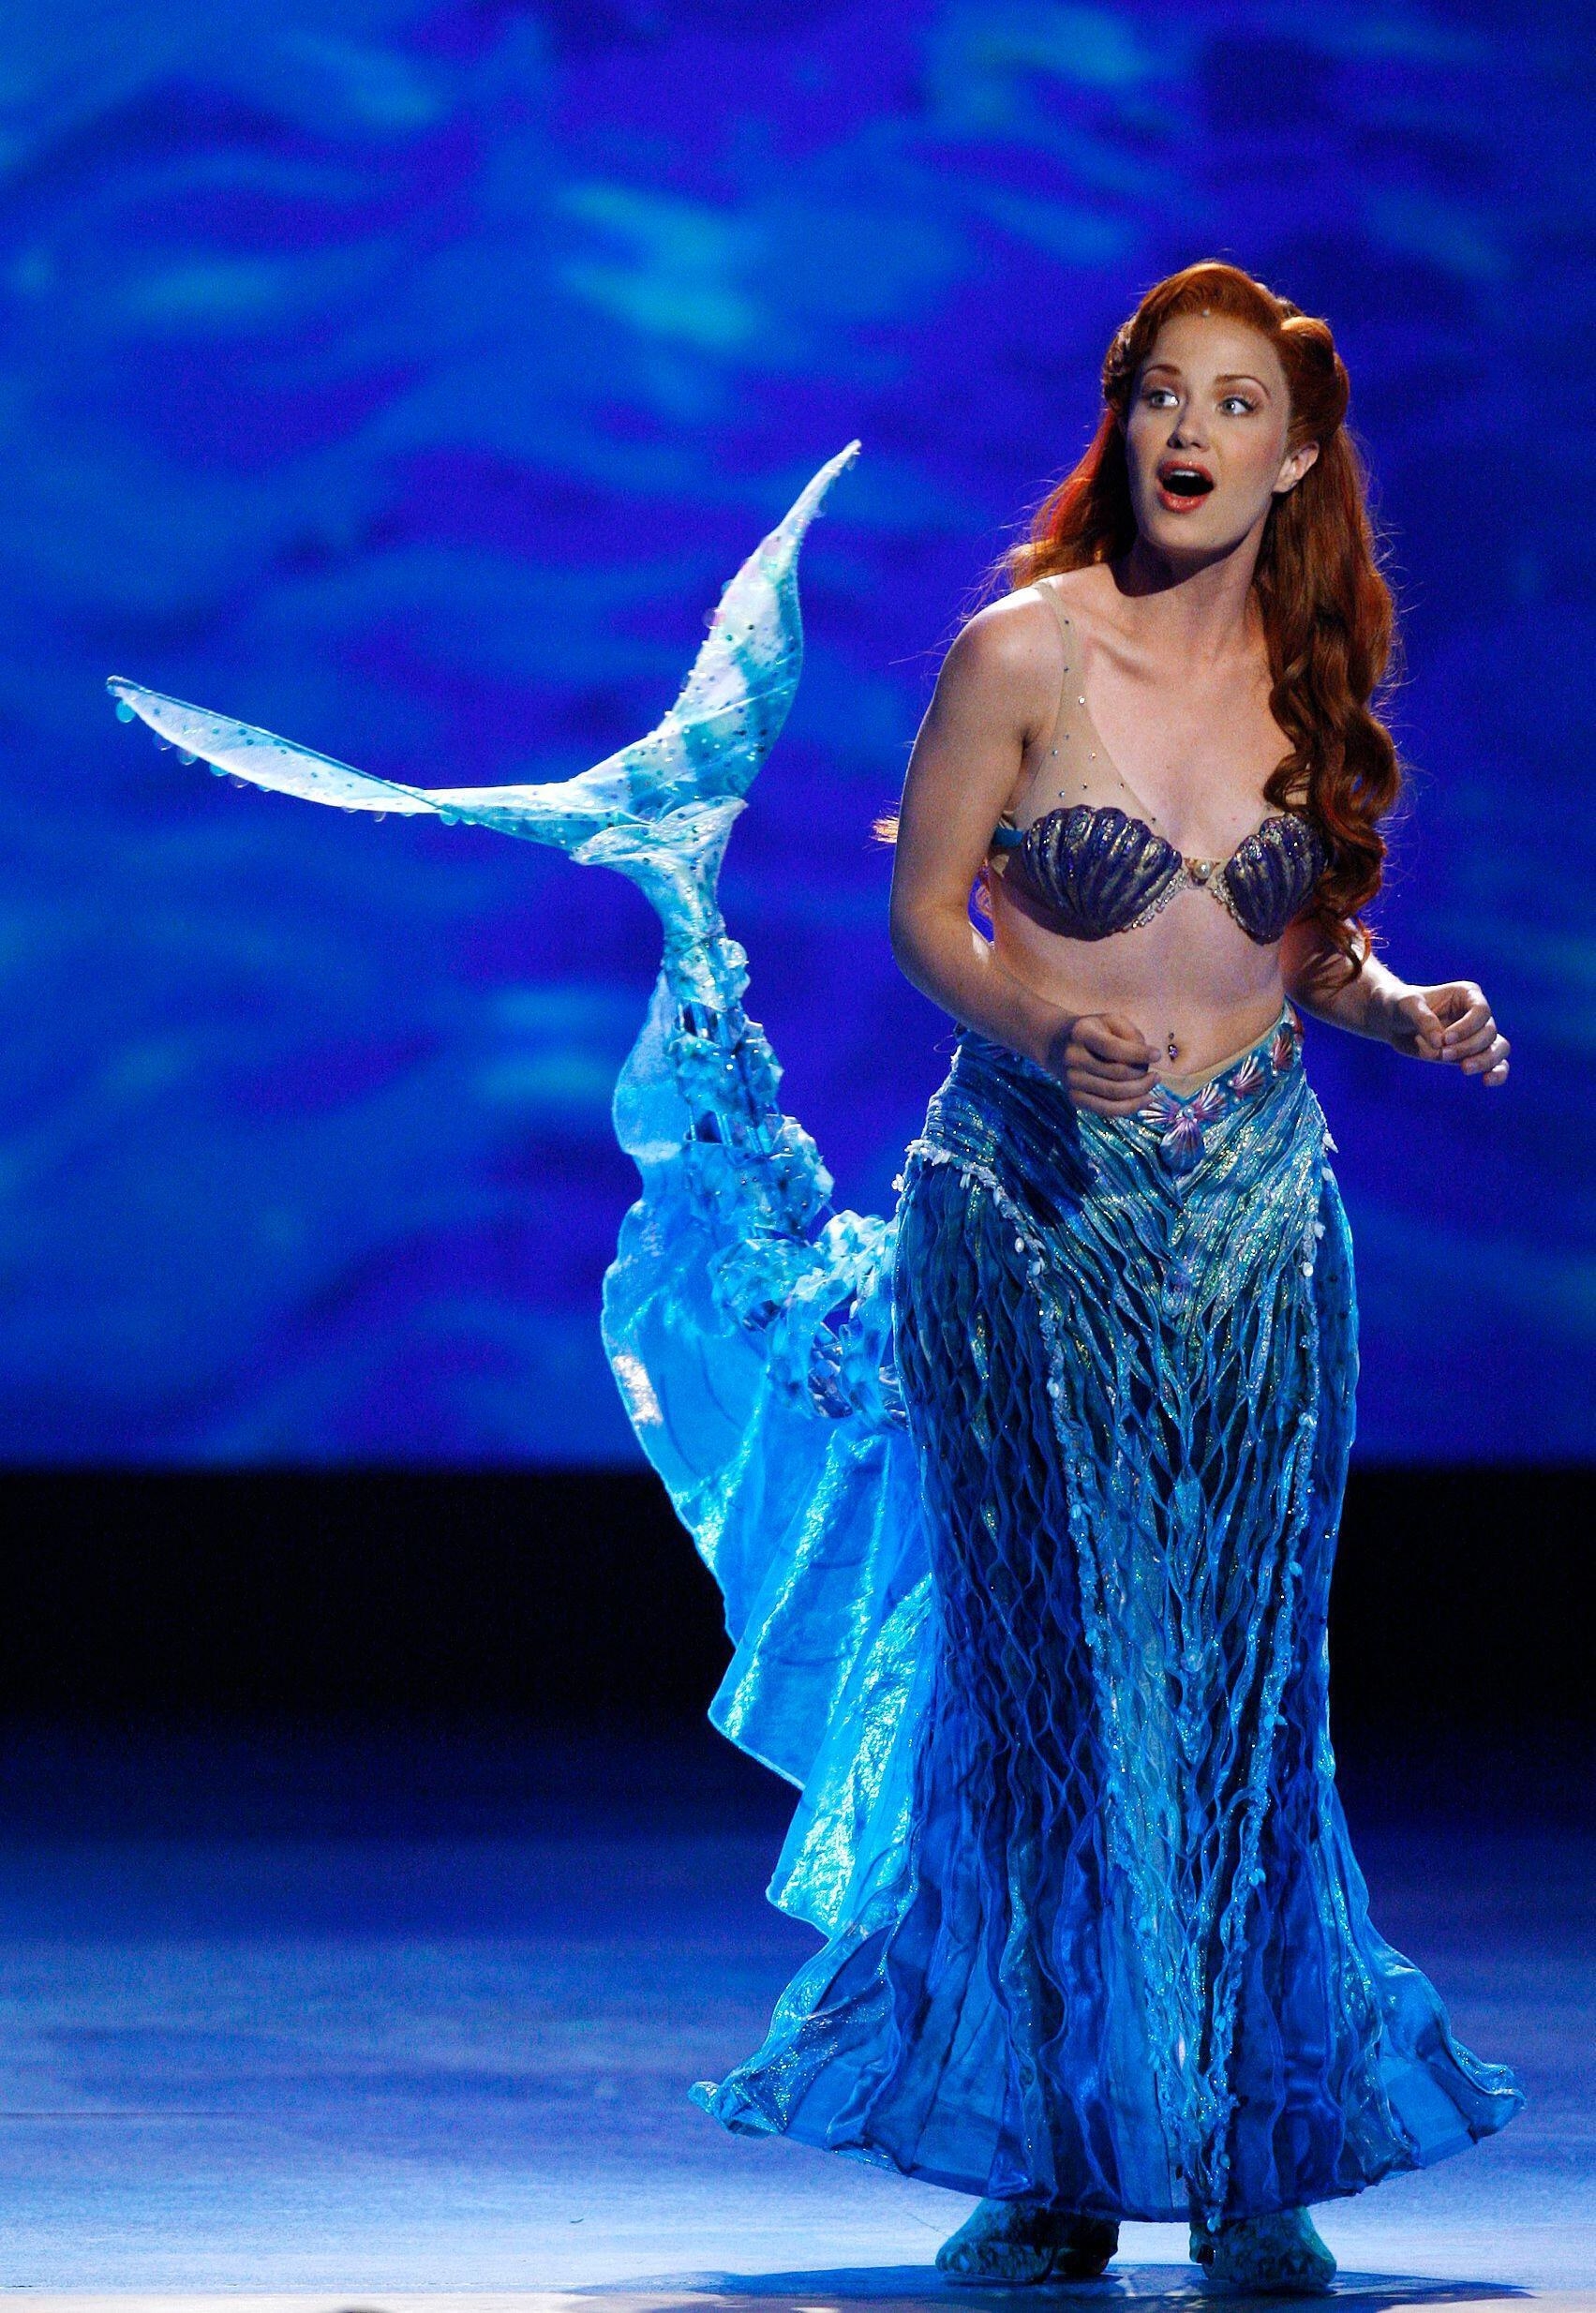 Sierra singing on stage with a large mermaid tail behind her